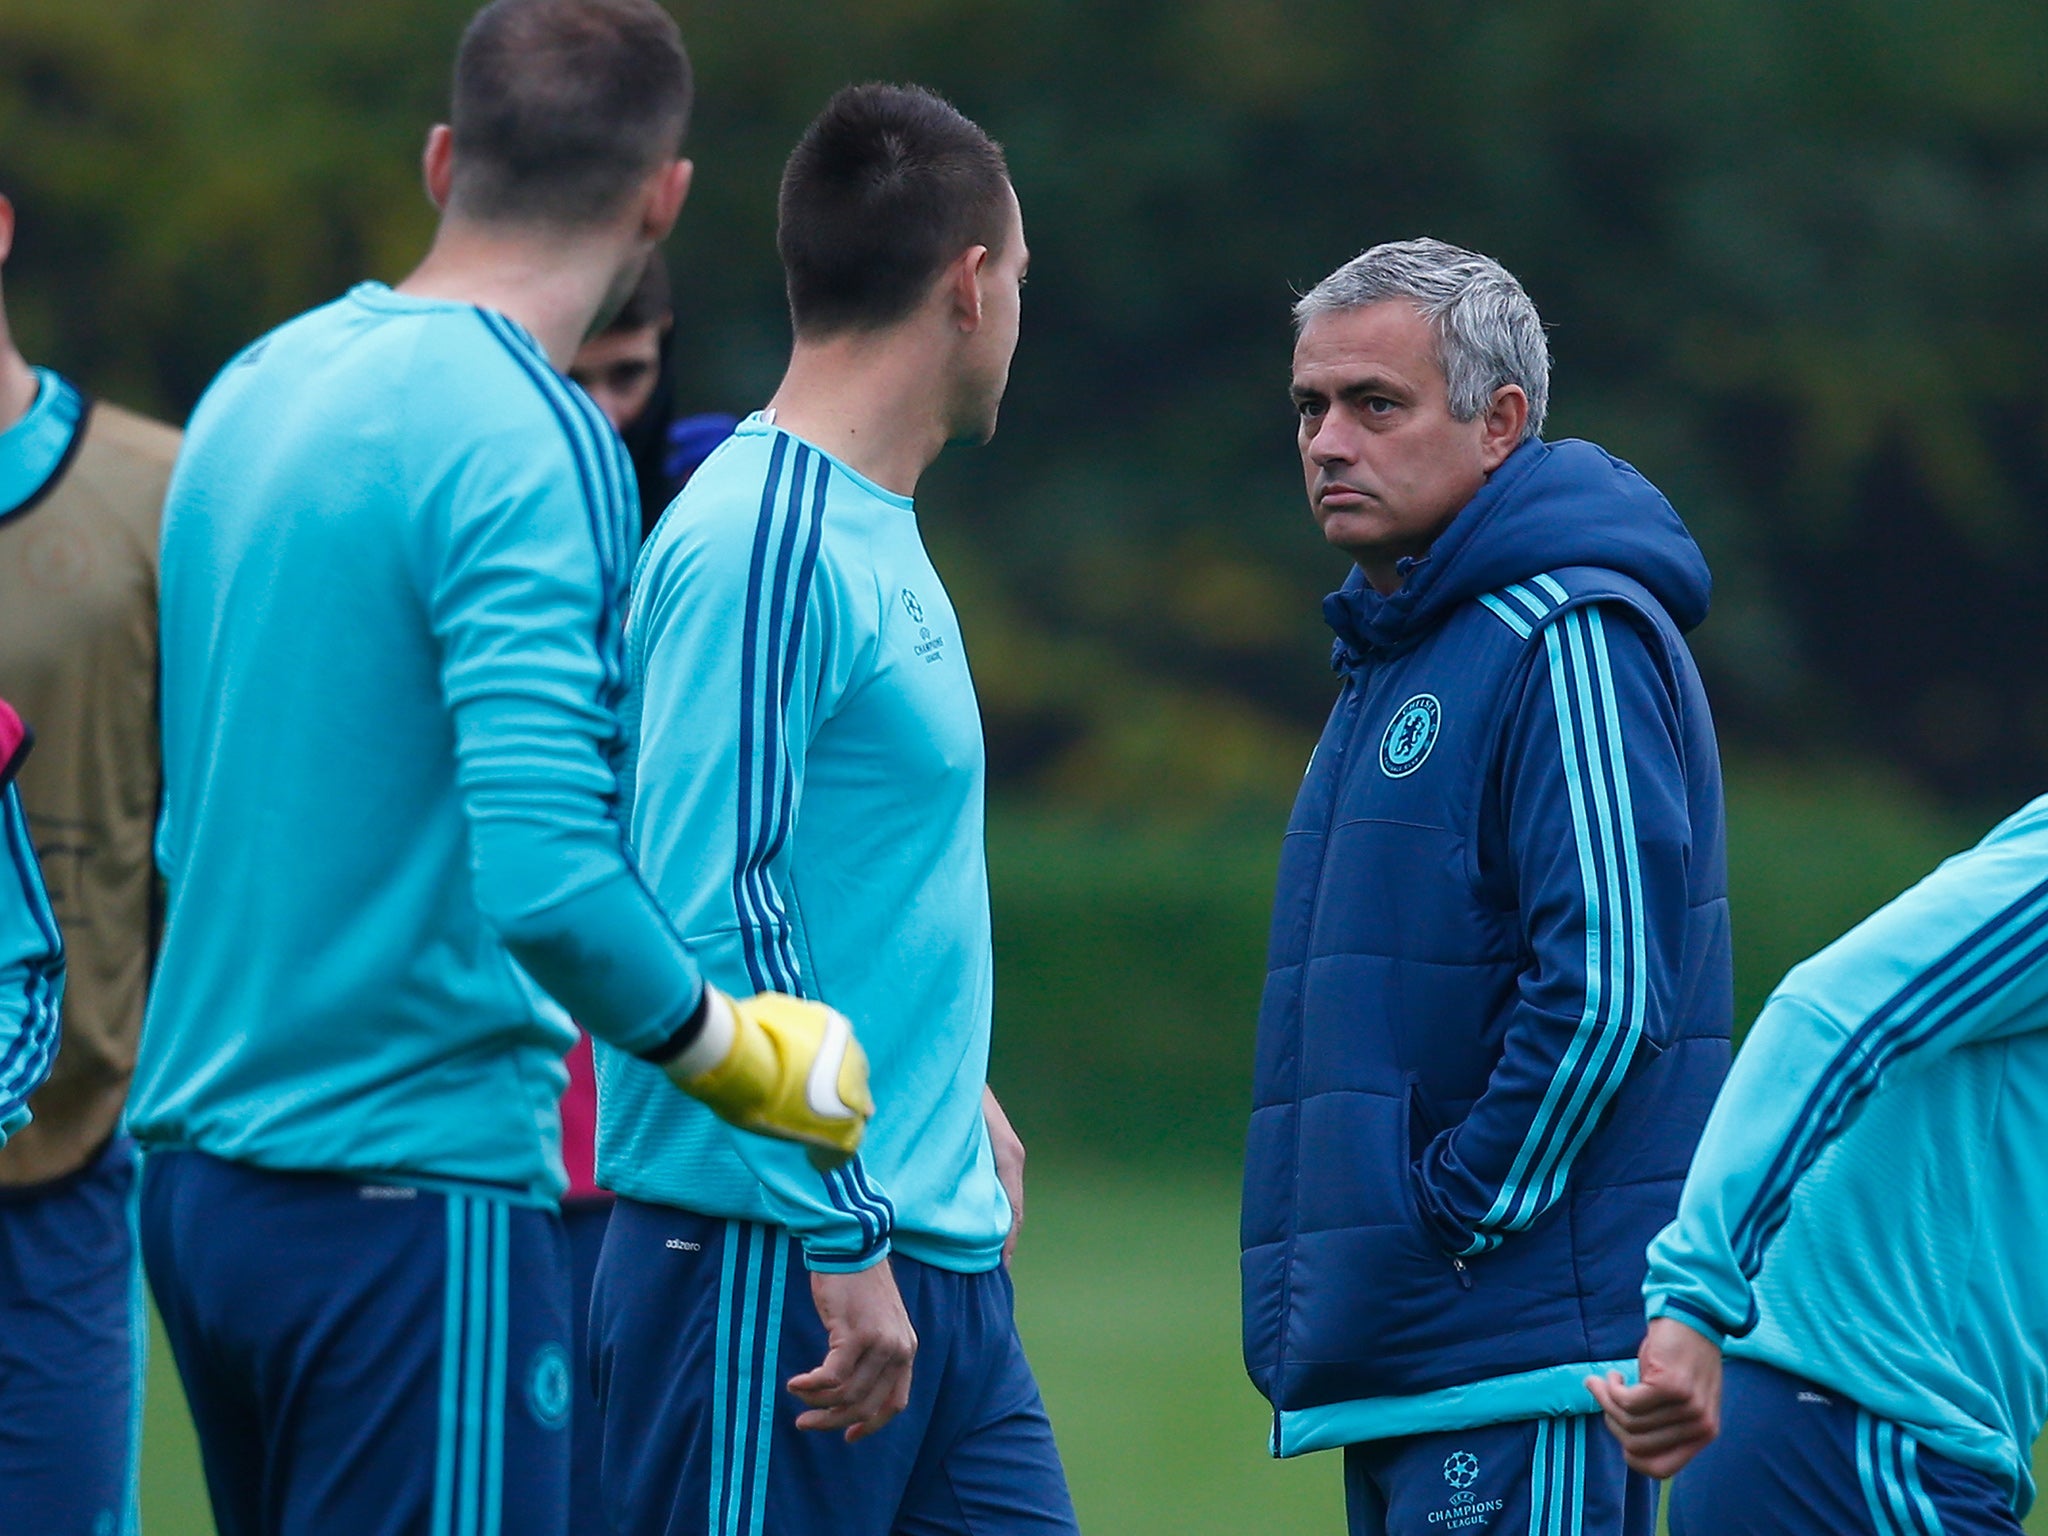 Jose Mourinho (right) looks at John Terry during training